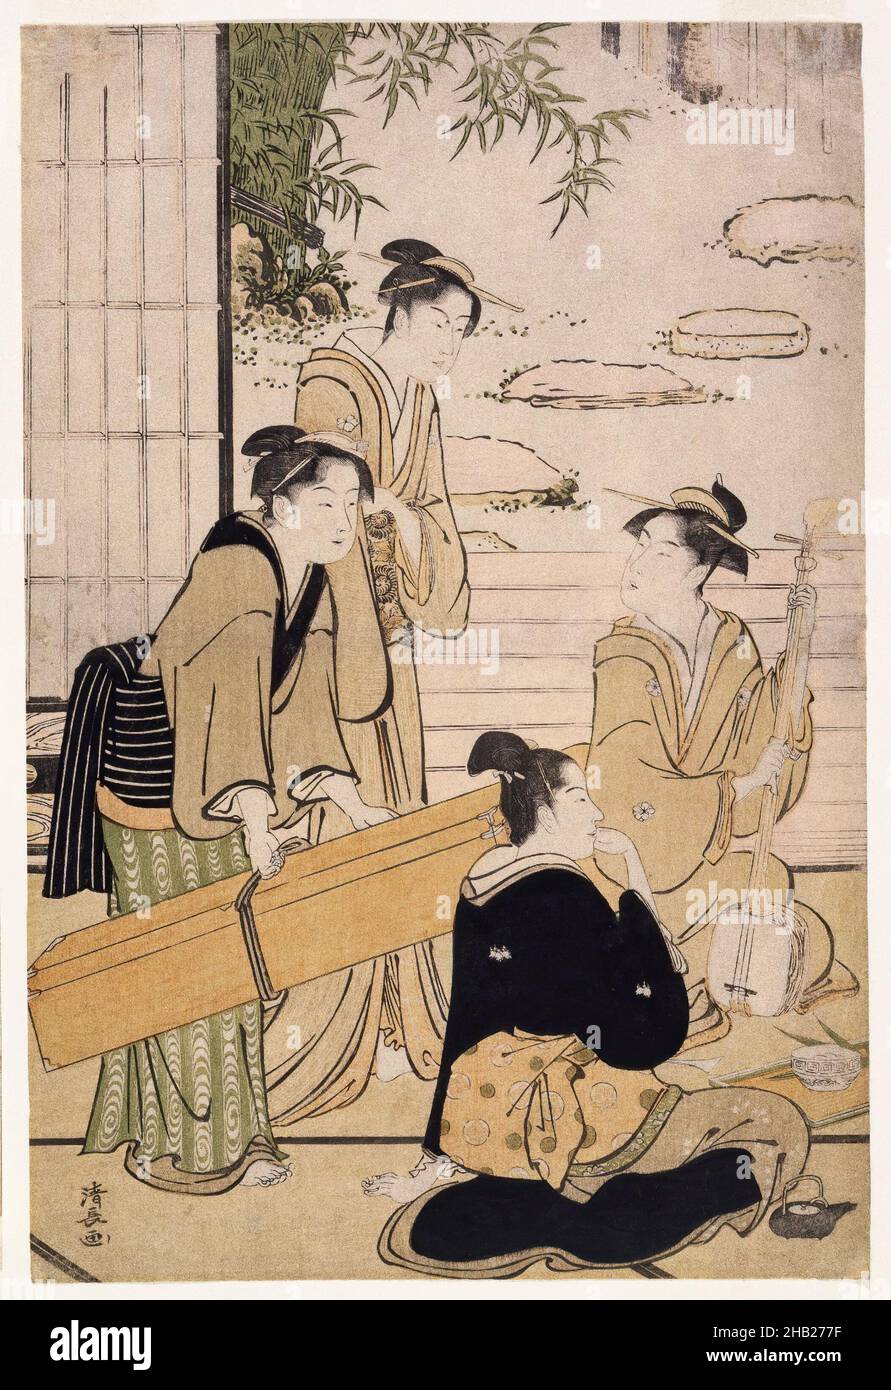 A Party in an Open Room Overlooking a Garden, from the series Contest of Contemporary Beauties of the Pleasure Quarters, Torii Kiyonaga, Japanese, 1752-1815, Color woodblock print on paper, Japan, ca. 1783-1784, Edo Period, 15 x 10 in., 48.0 x 25.5cm Stock Photo